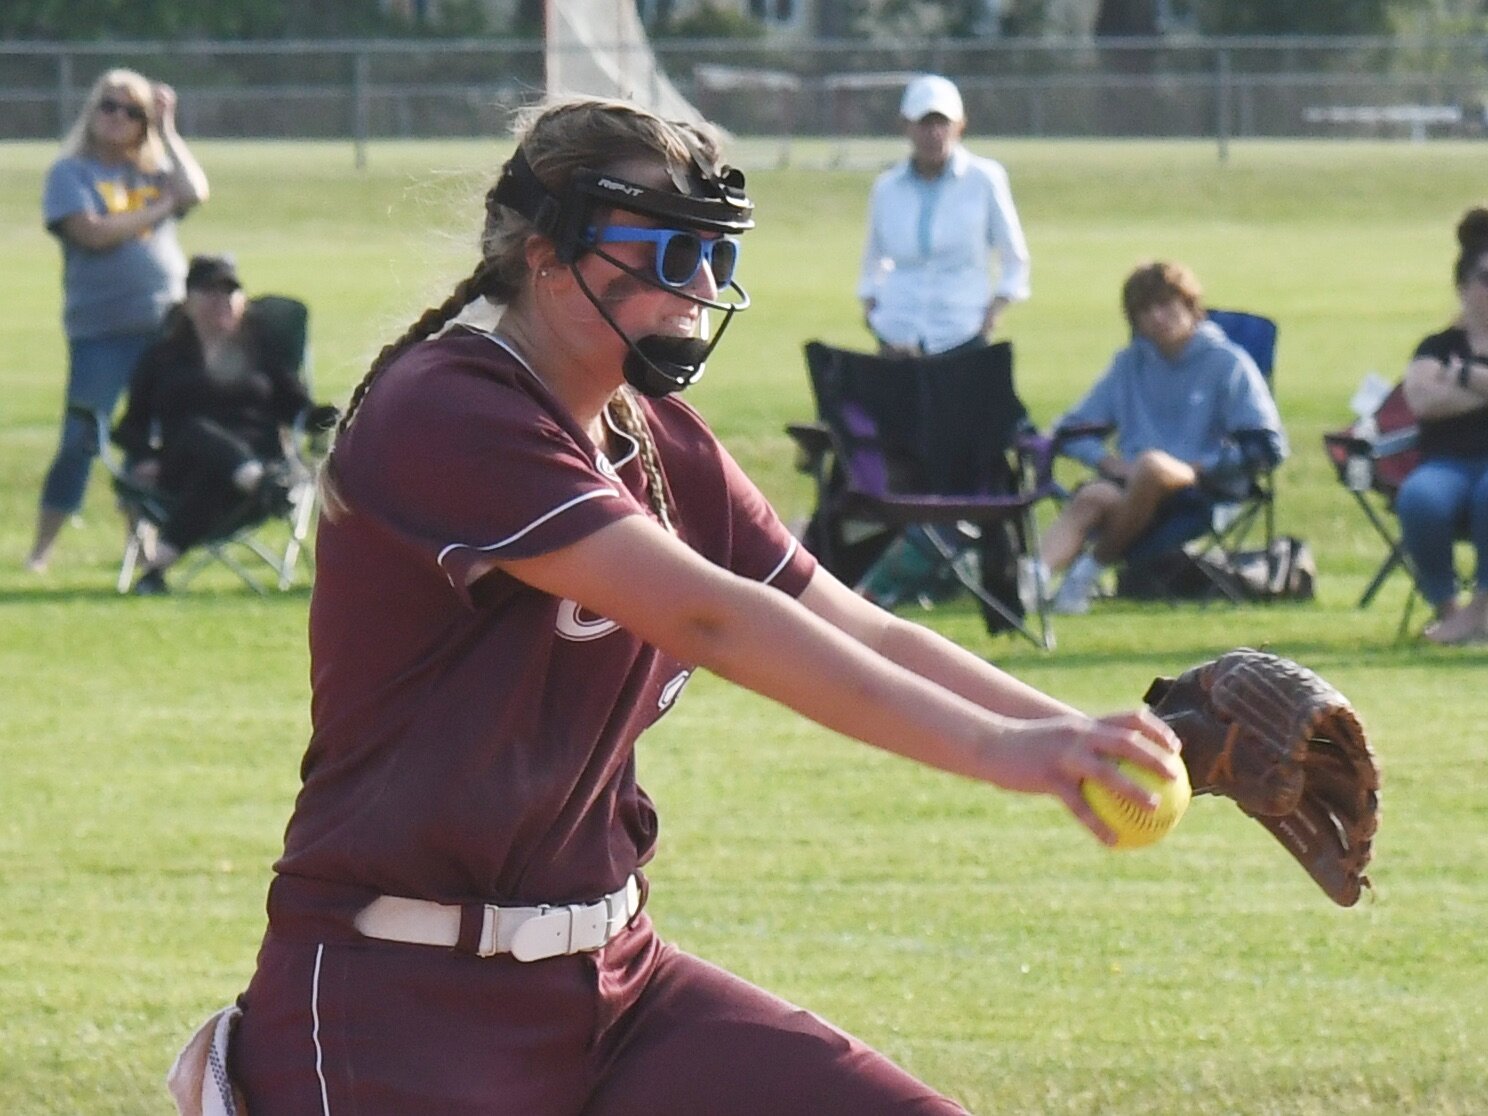 Clinton's Chloe White throws a pitch during a Section III Class B first-round tournament game against Holland Patent on Monday. Clinton fell 22-1.